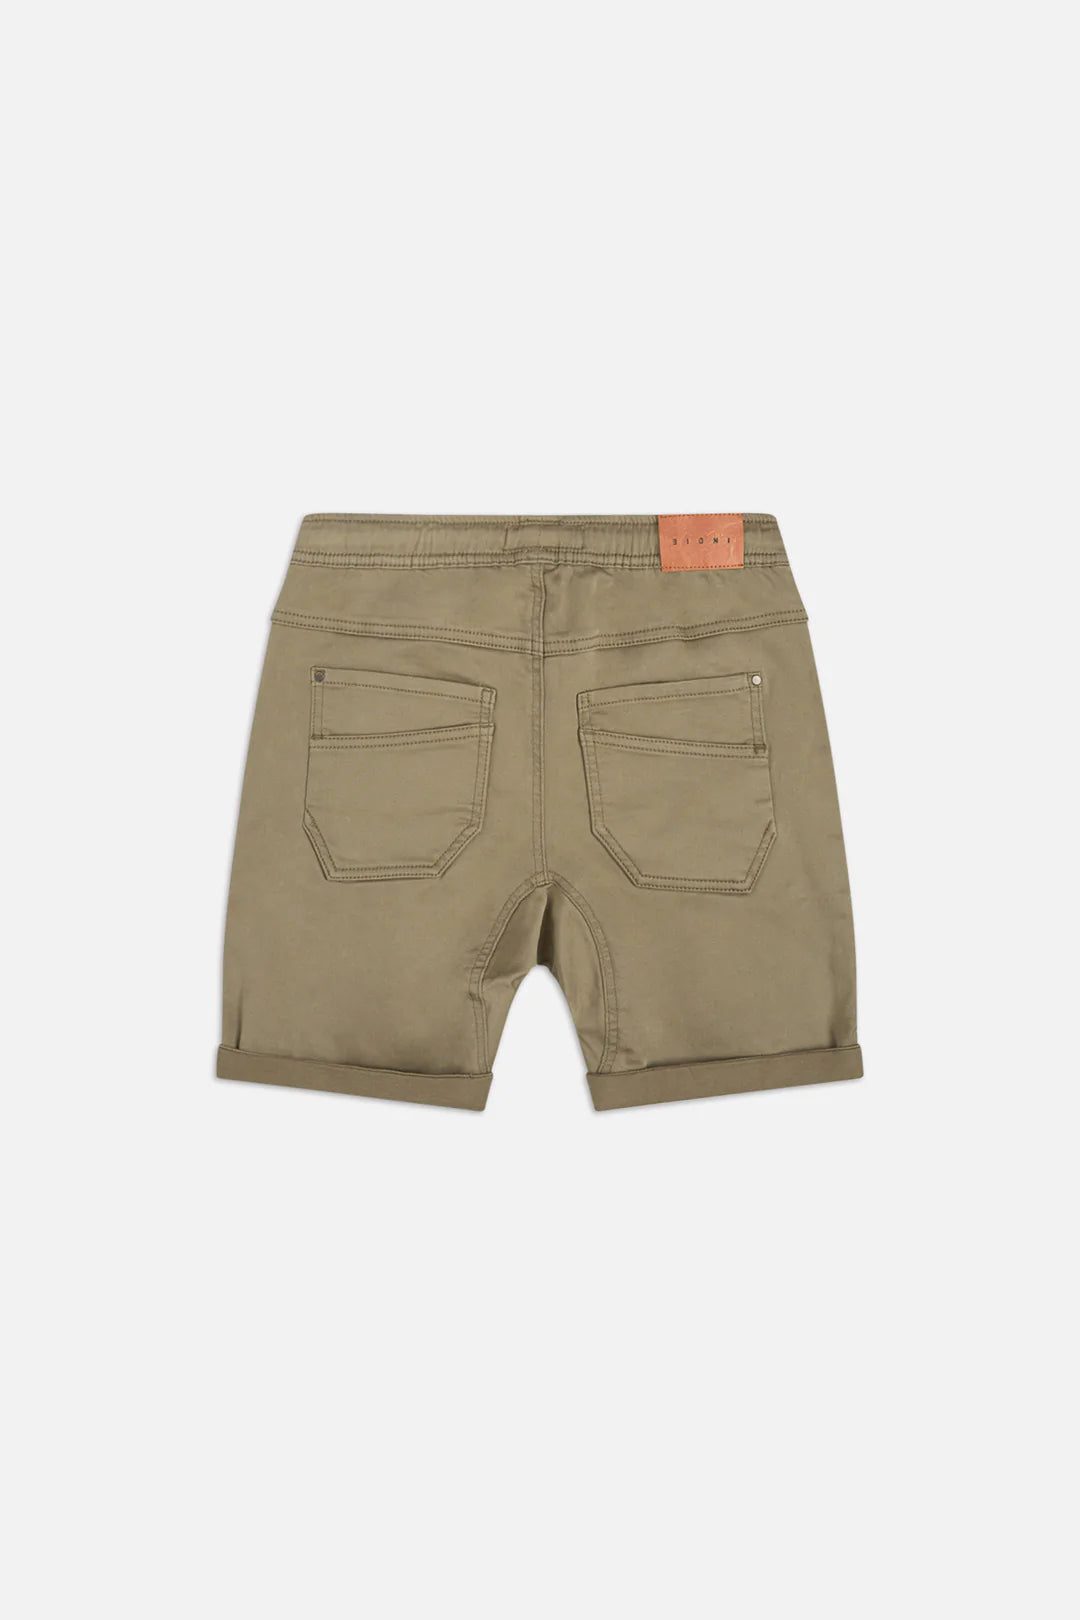 ARCHED DRIFTER SHORT - WASHED CINNAMON